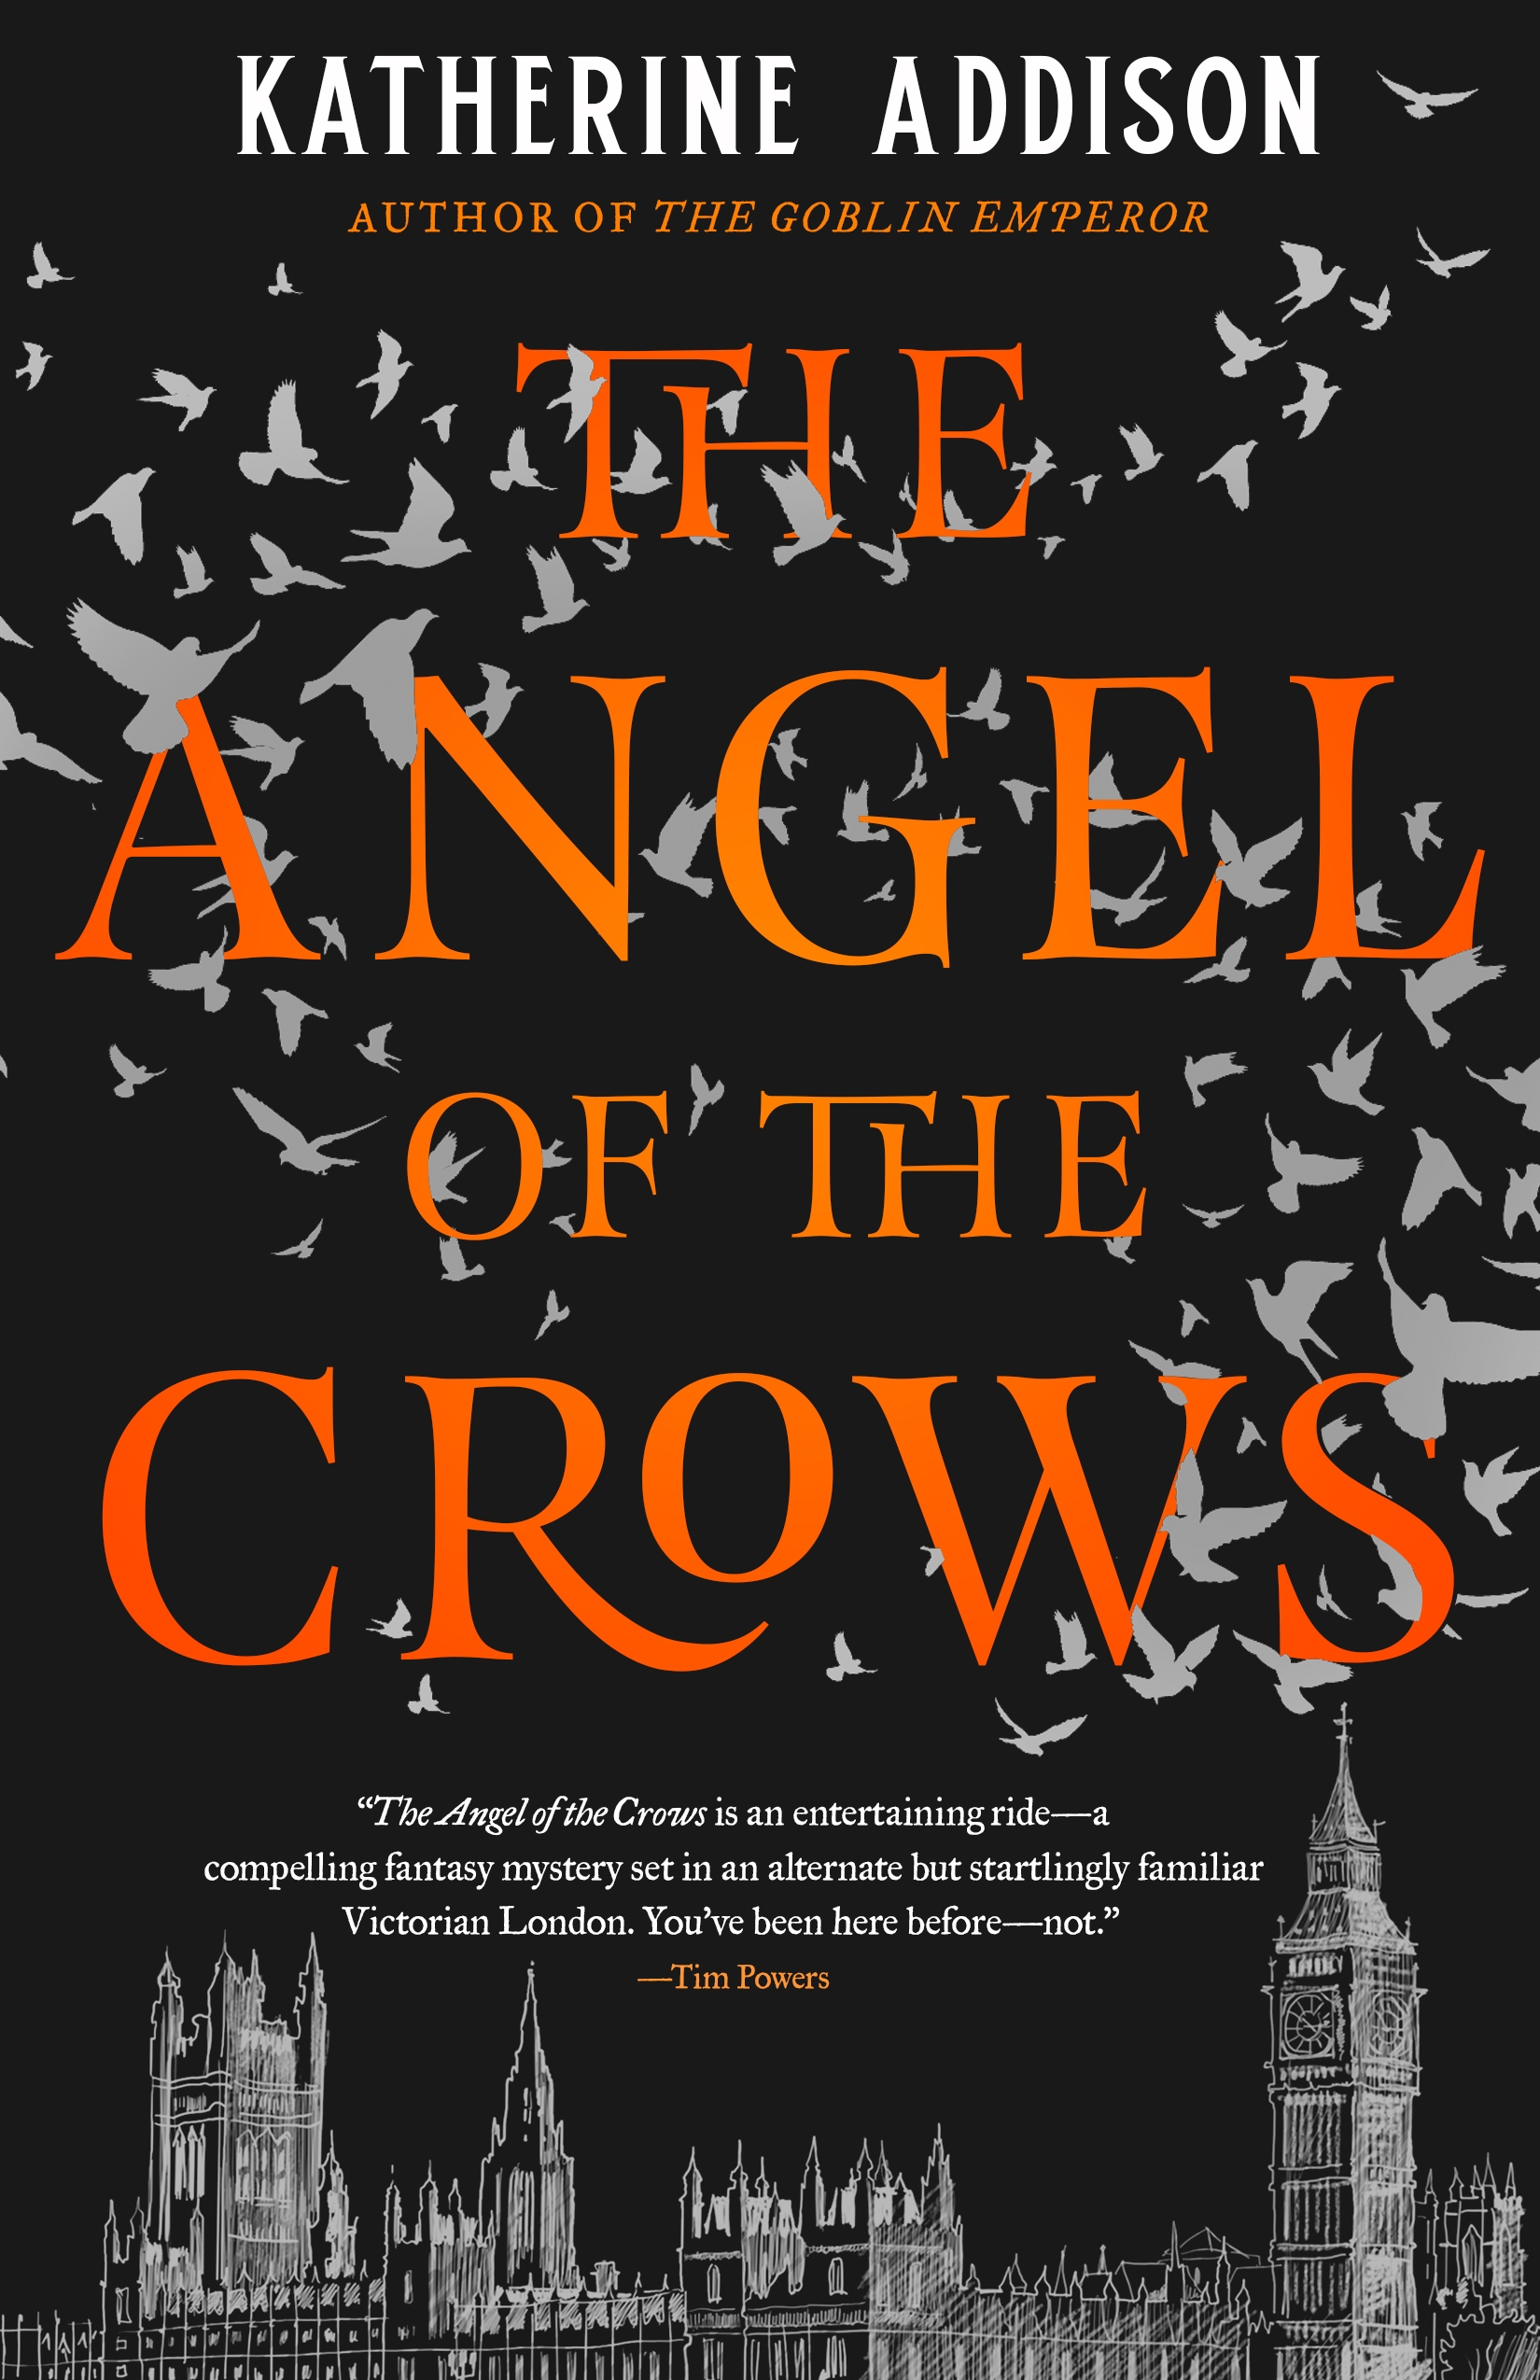 The Angel of the Crows by Katherine Addison